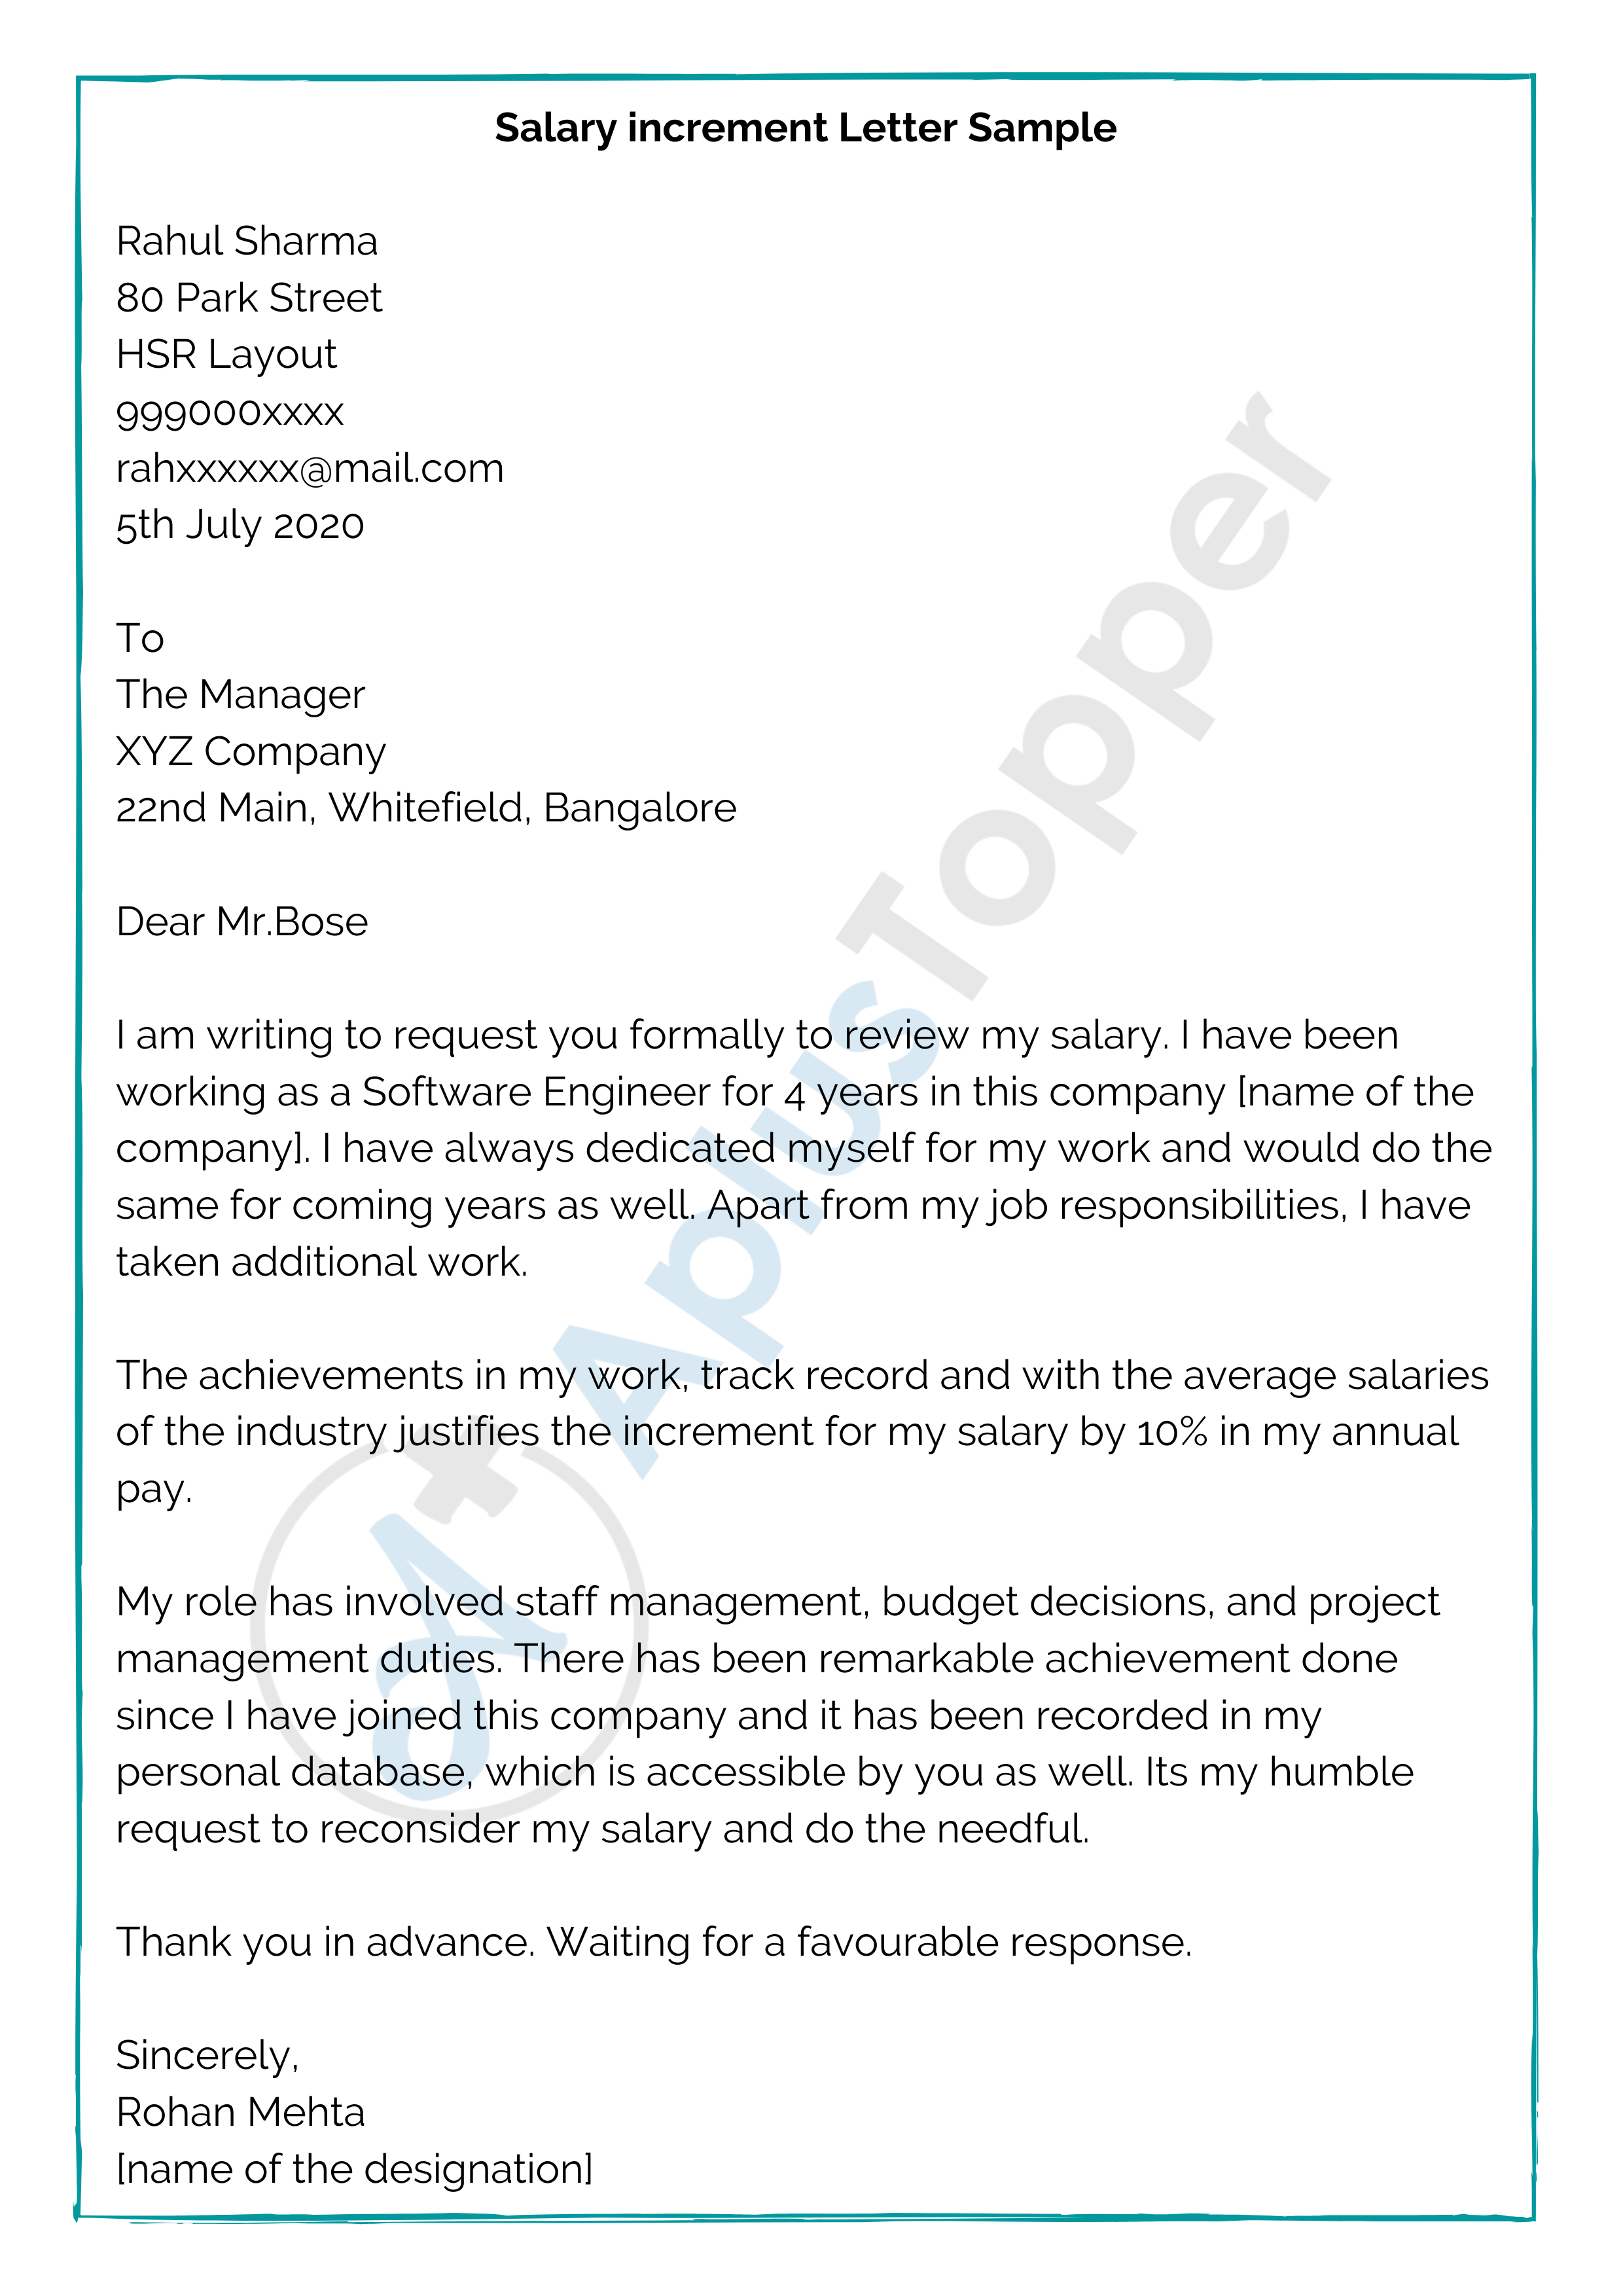 salary increase request letter sample